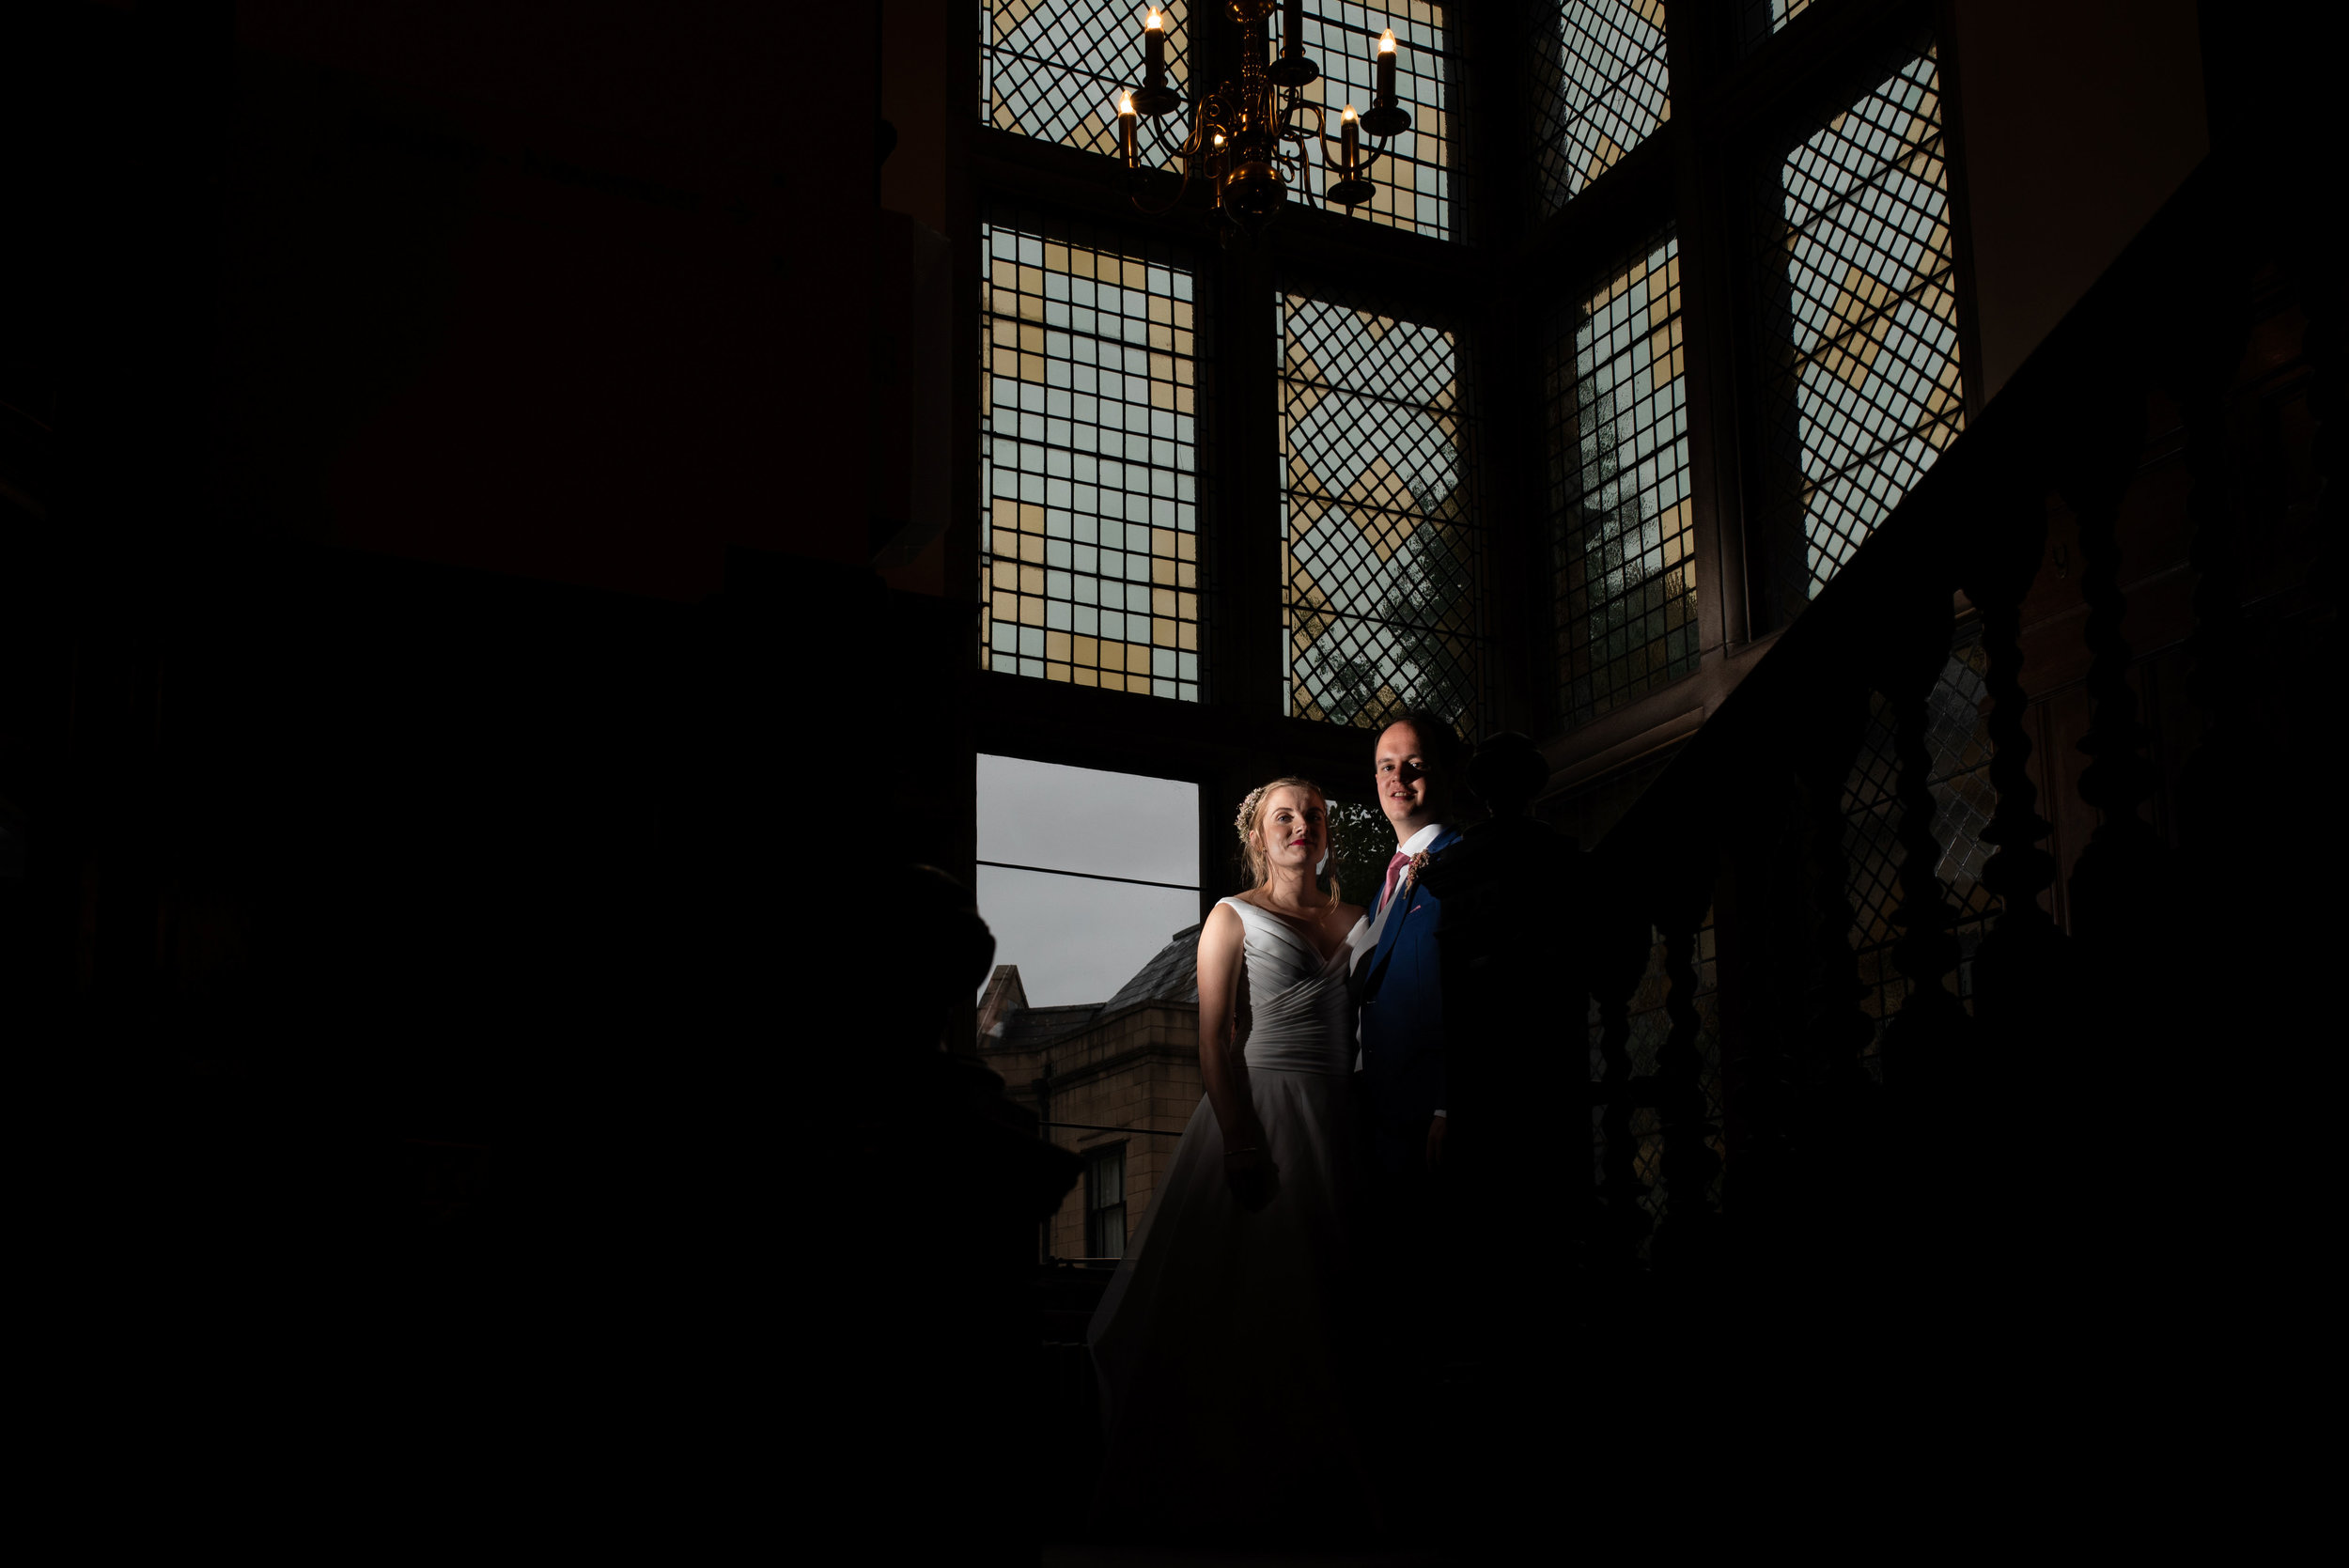 Bride and groom lit up with a flash inside rookery hall